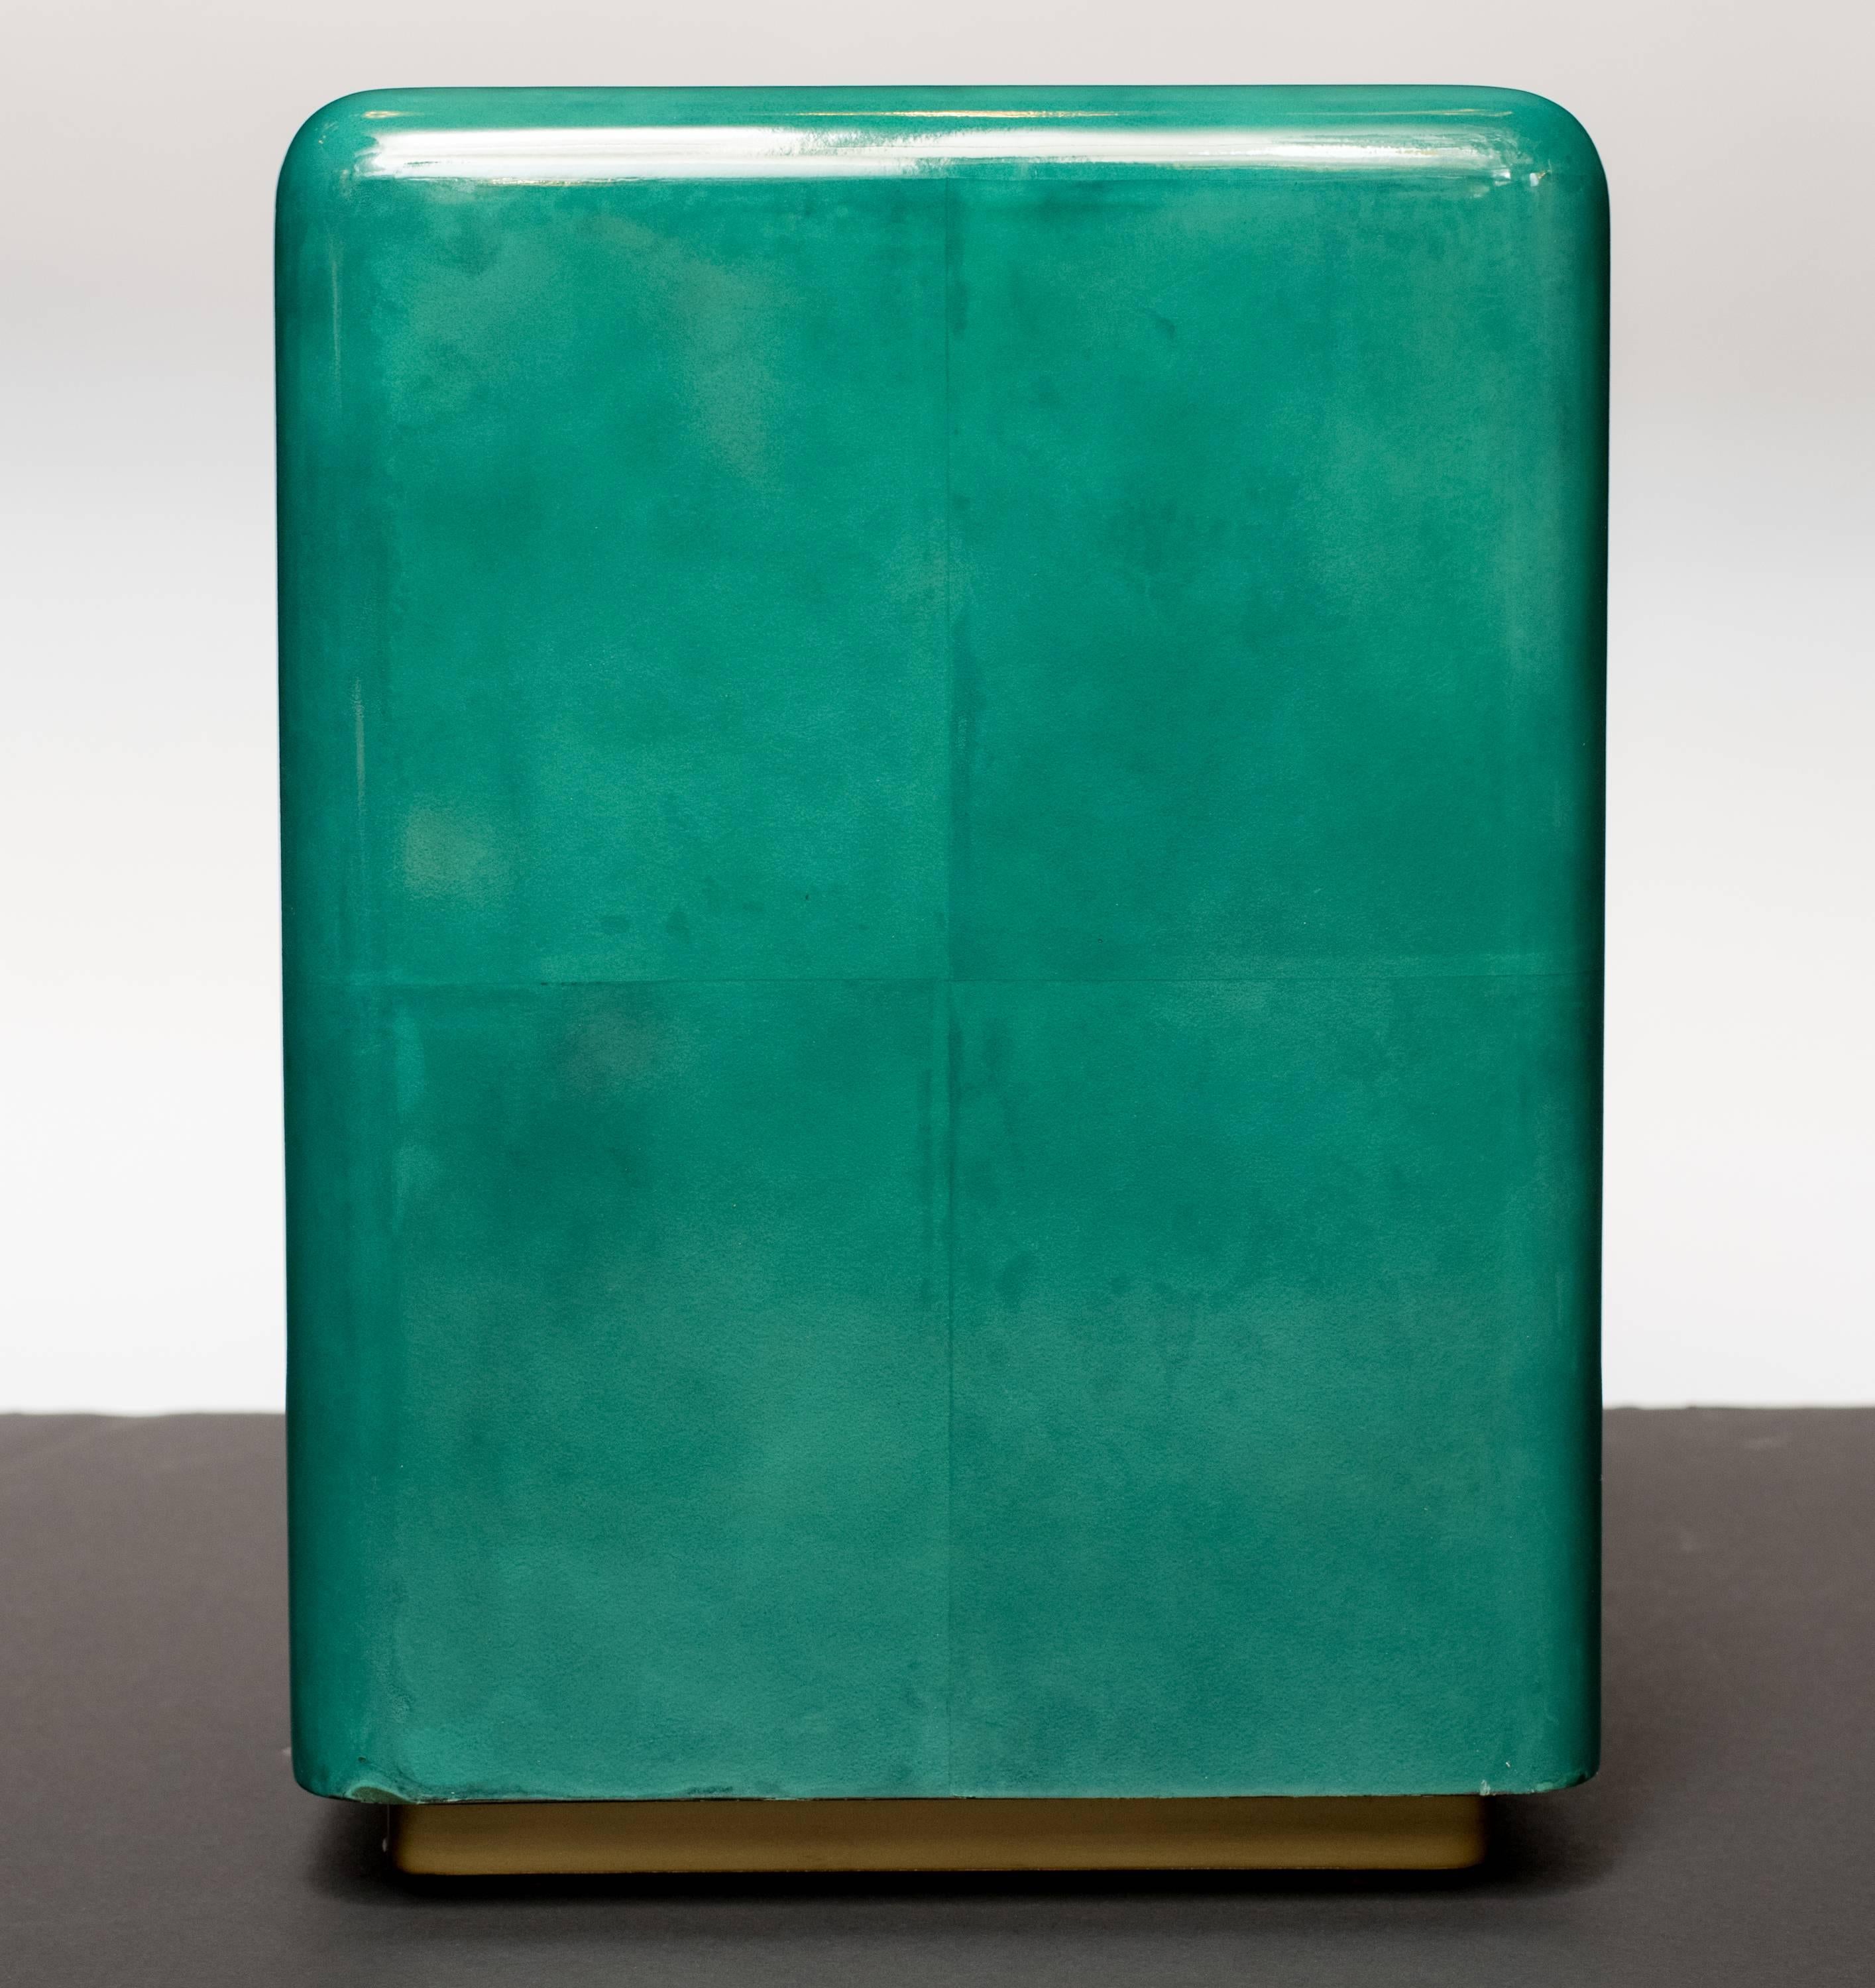 Outstanding handcrafted side tables with cube form and floating base design.
Comprised of lacquered goatskin or vellum over wood in hand-dyed hues of teal or turquoise. The tables feature streamline design with even parchment patchwork and a gold